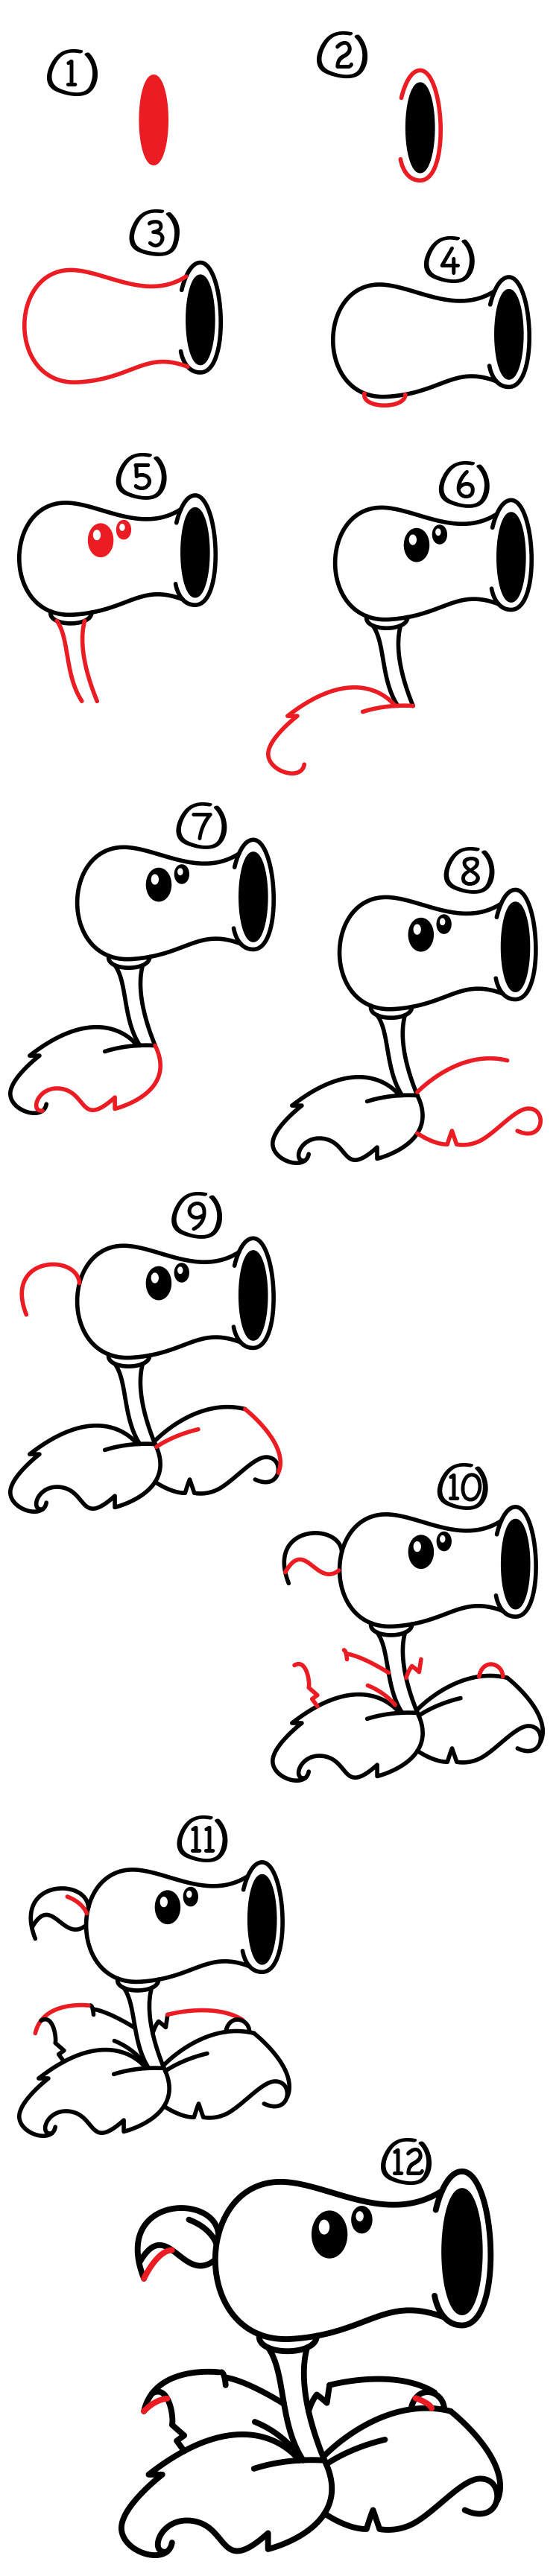 How To Draw A Peashooter From Plants Vs. Zombies